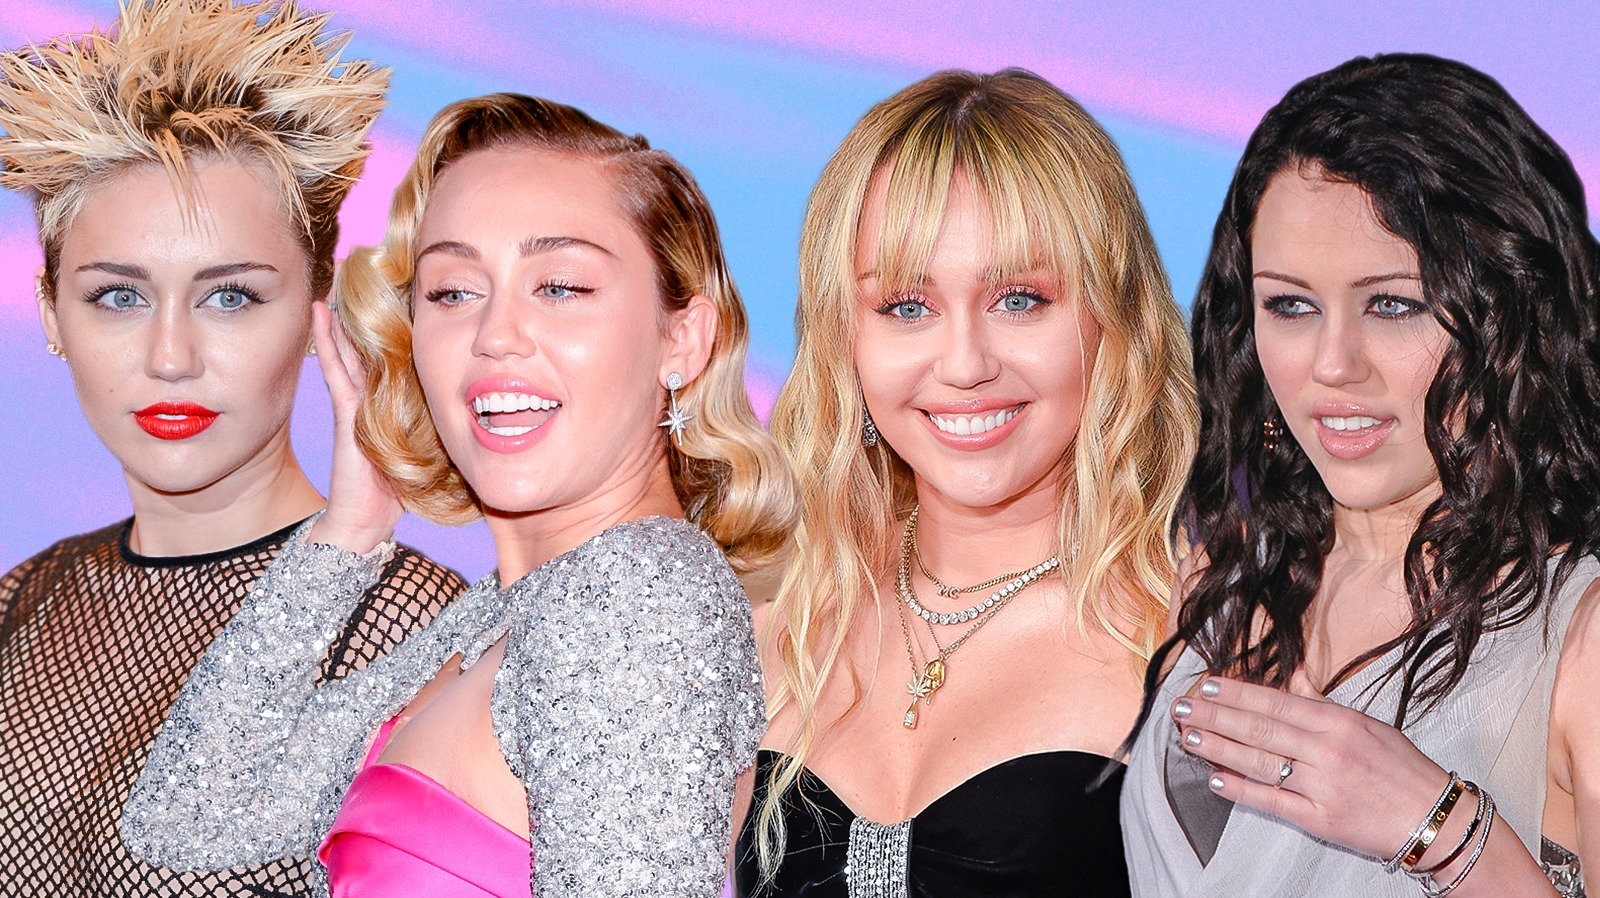 Miley Cyrus Shows Off Blue Hair Transformation on Social Media - wide 1